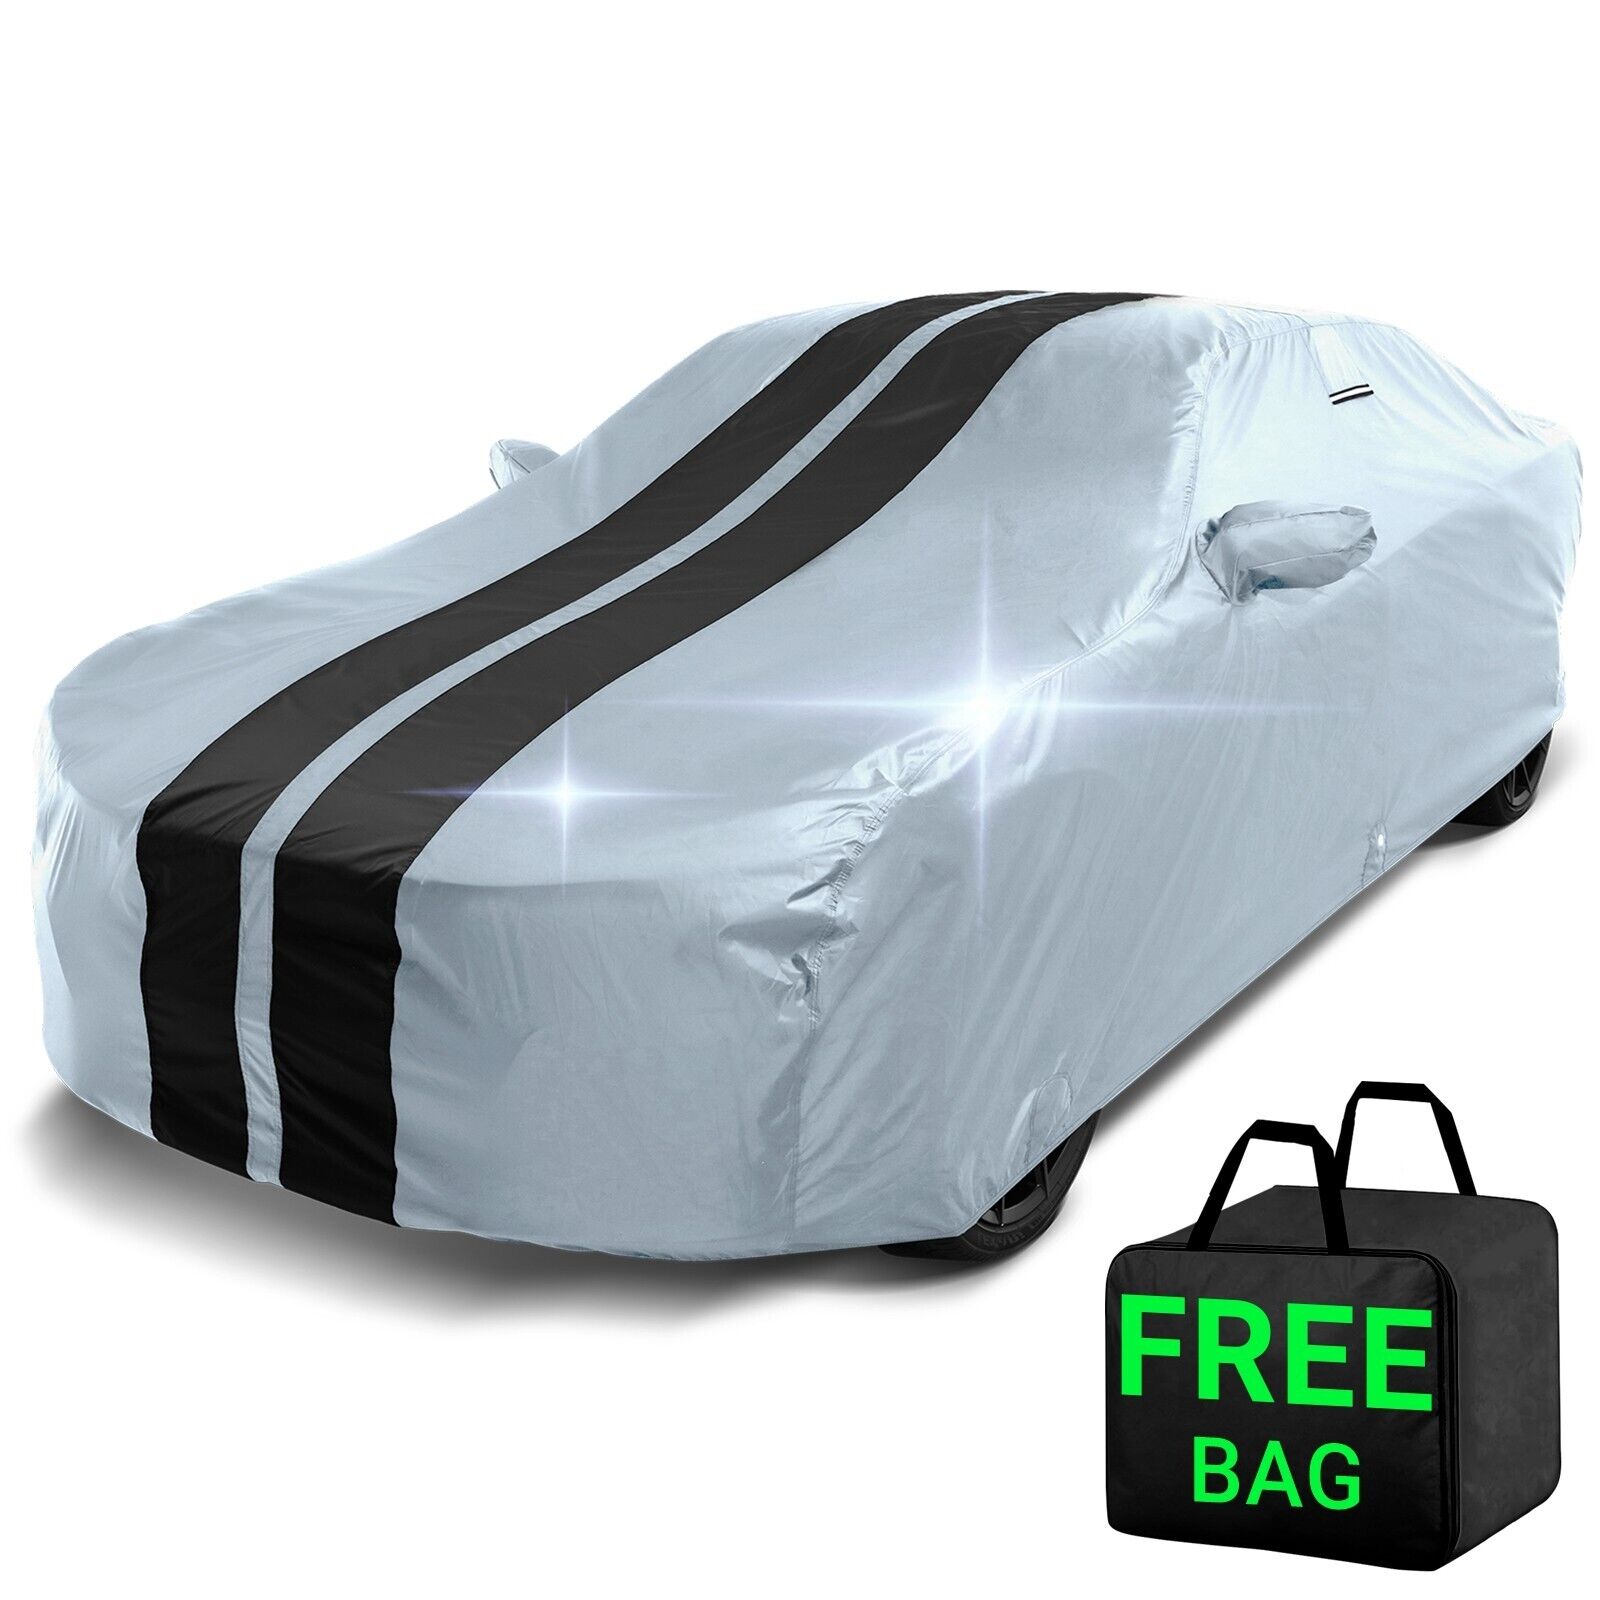 1989-1997 Opel Calibra Custom Car Cover - All-Weather Waterproof Protection